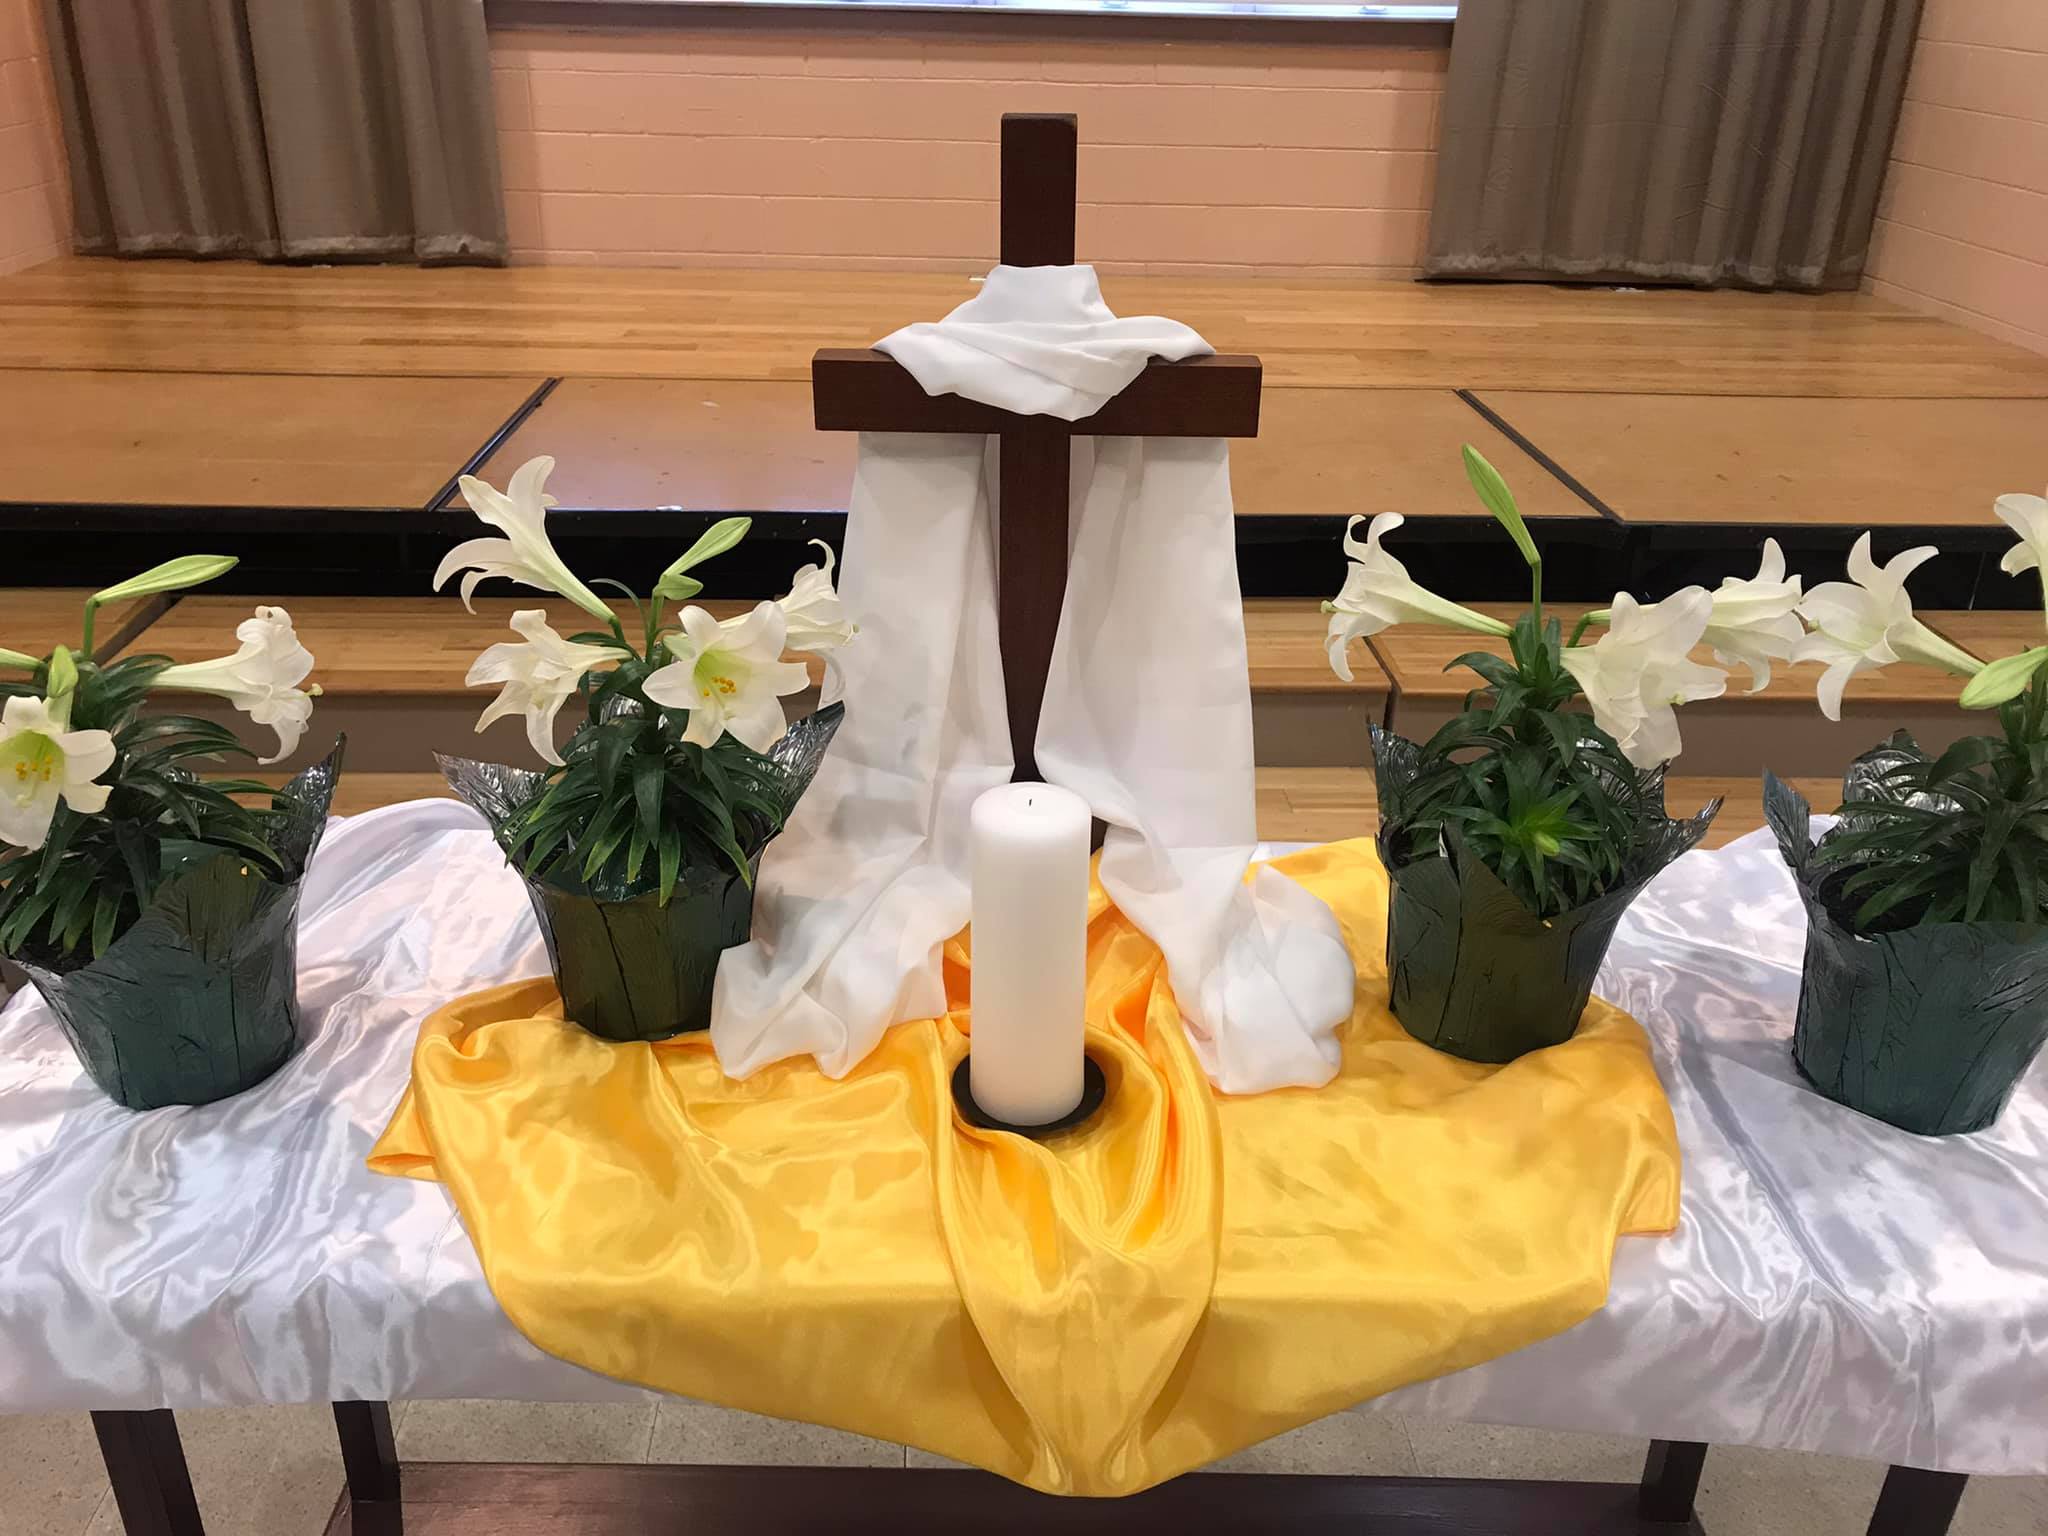 Easter photo cross and easter lillies at contmp. service